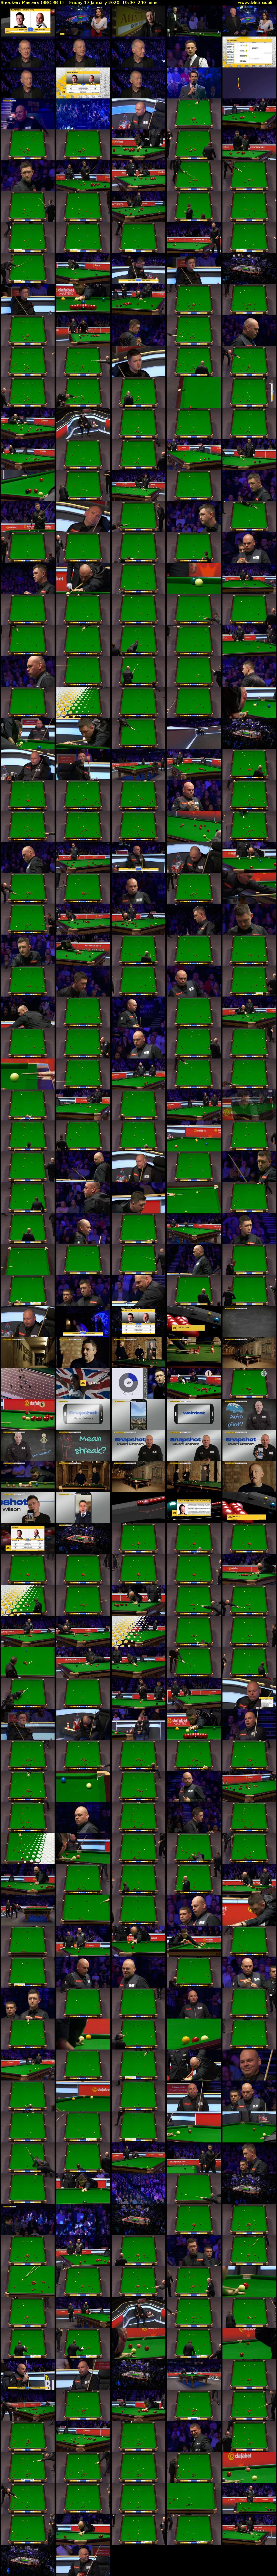 Snooker: Masters (BBC RB 1) Friday 17 January 2020 19:00 - 23:00